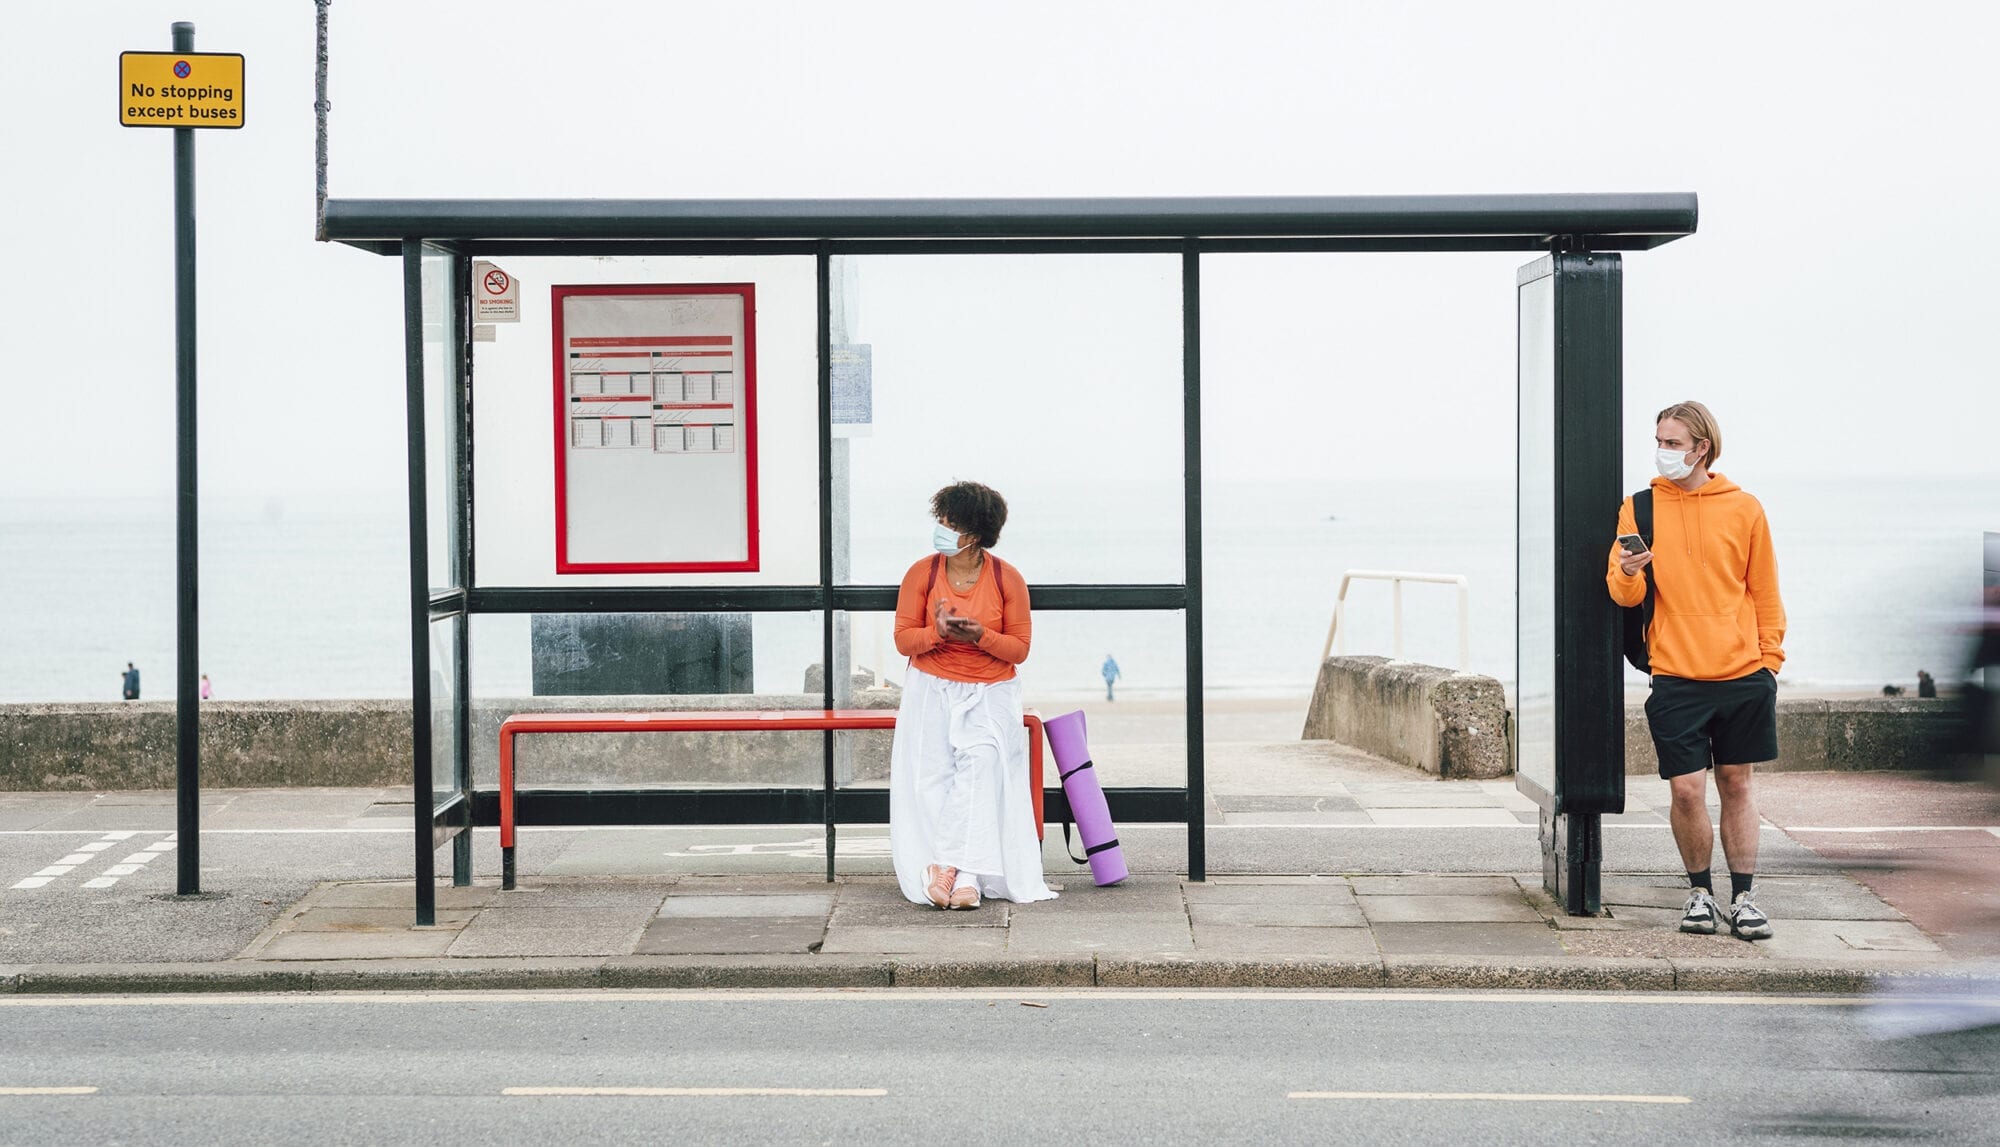 A woman of colour waits at a bus shelter by a road